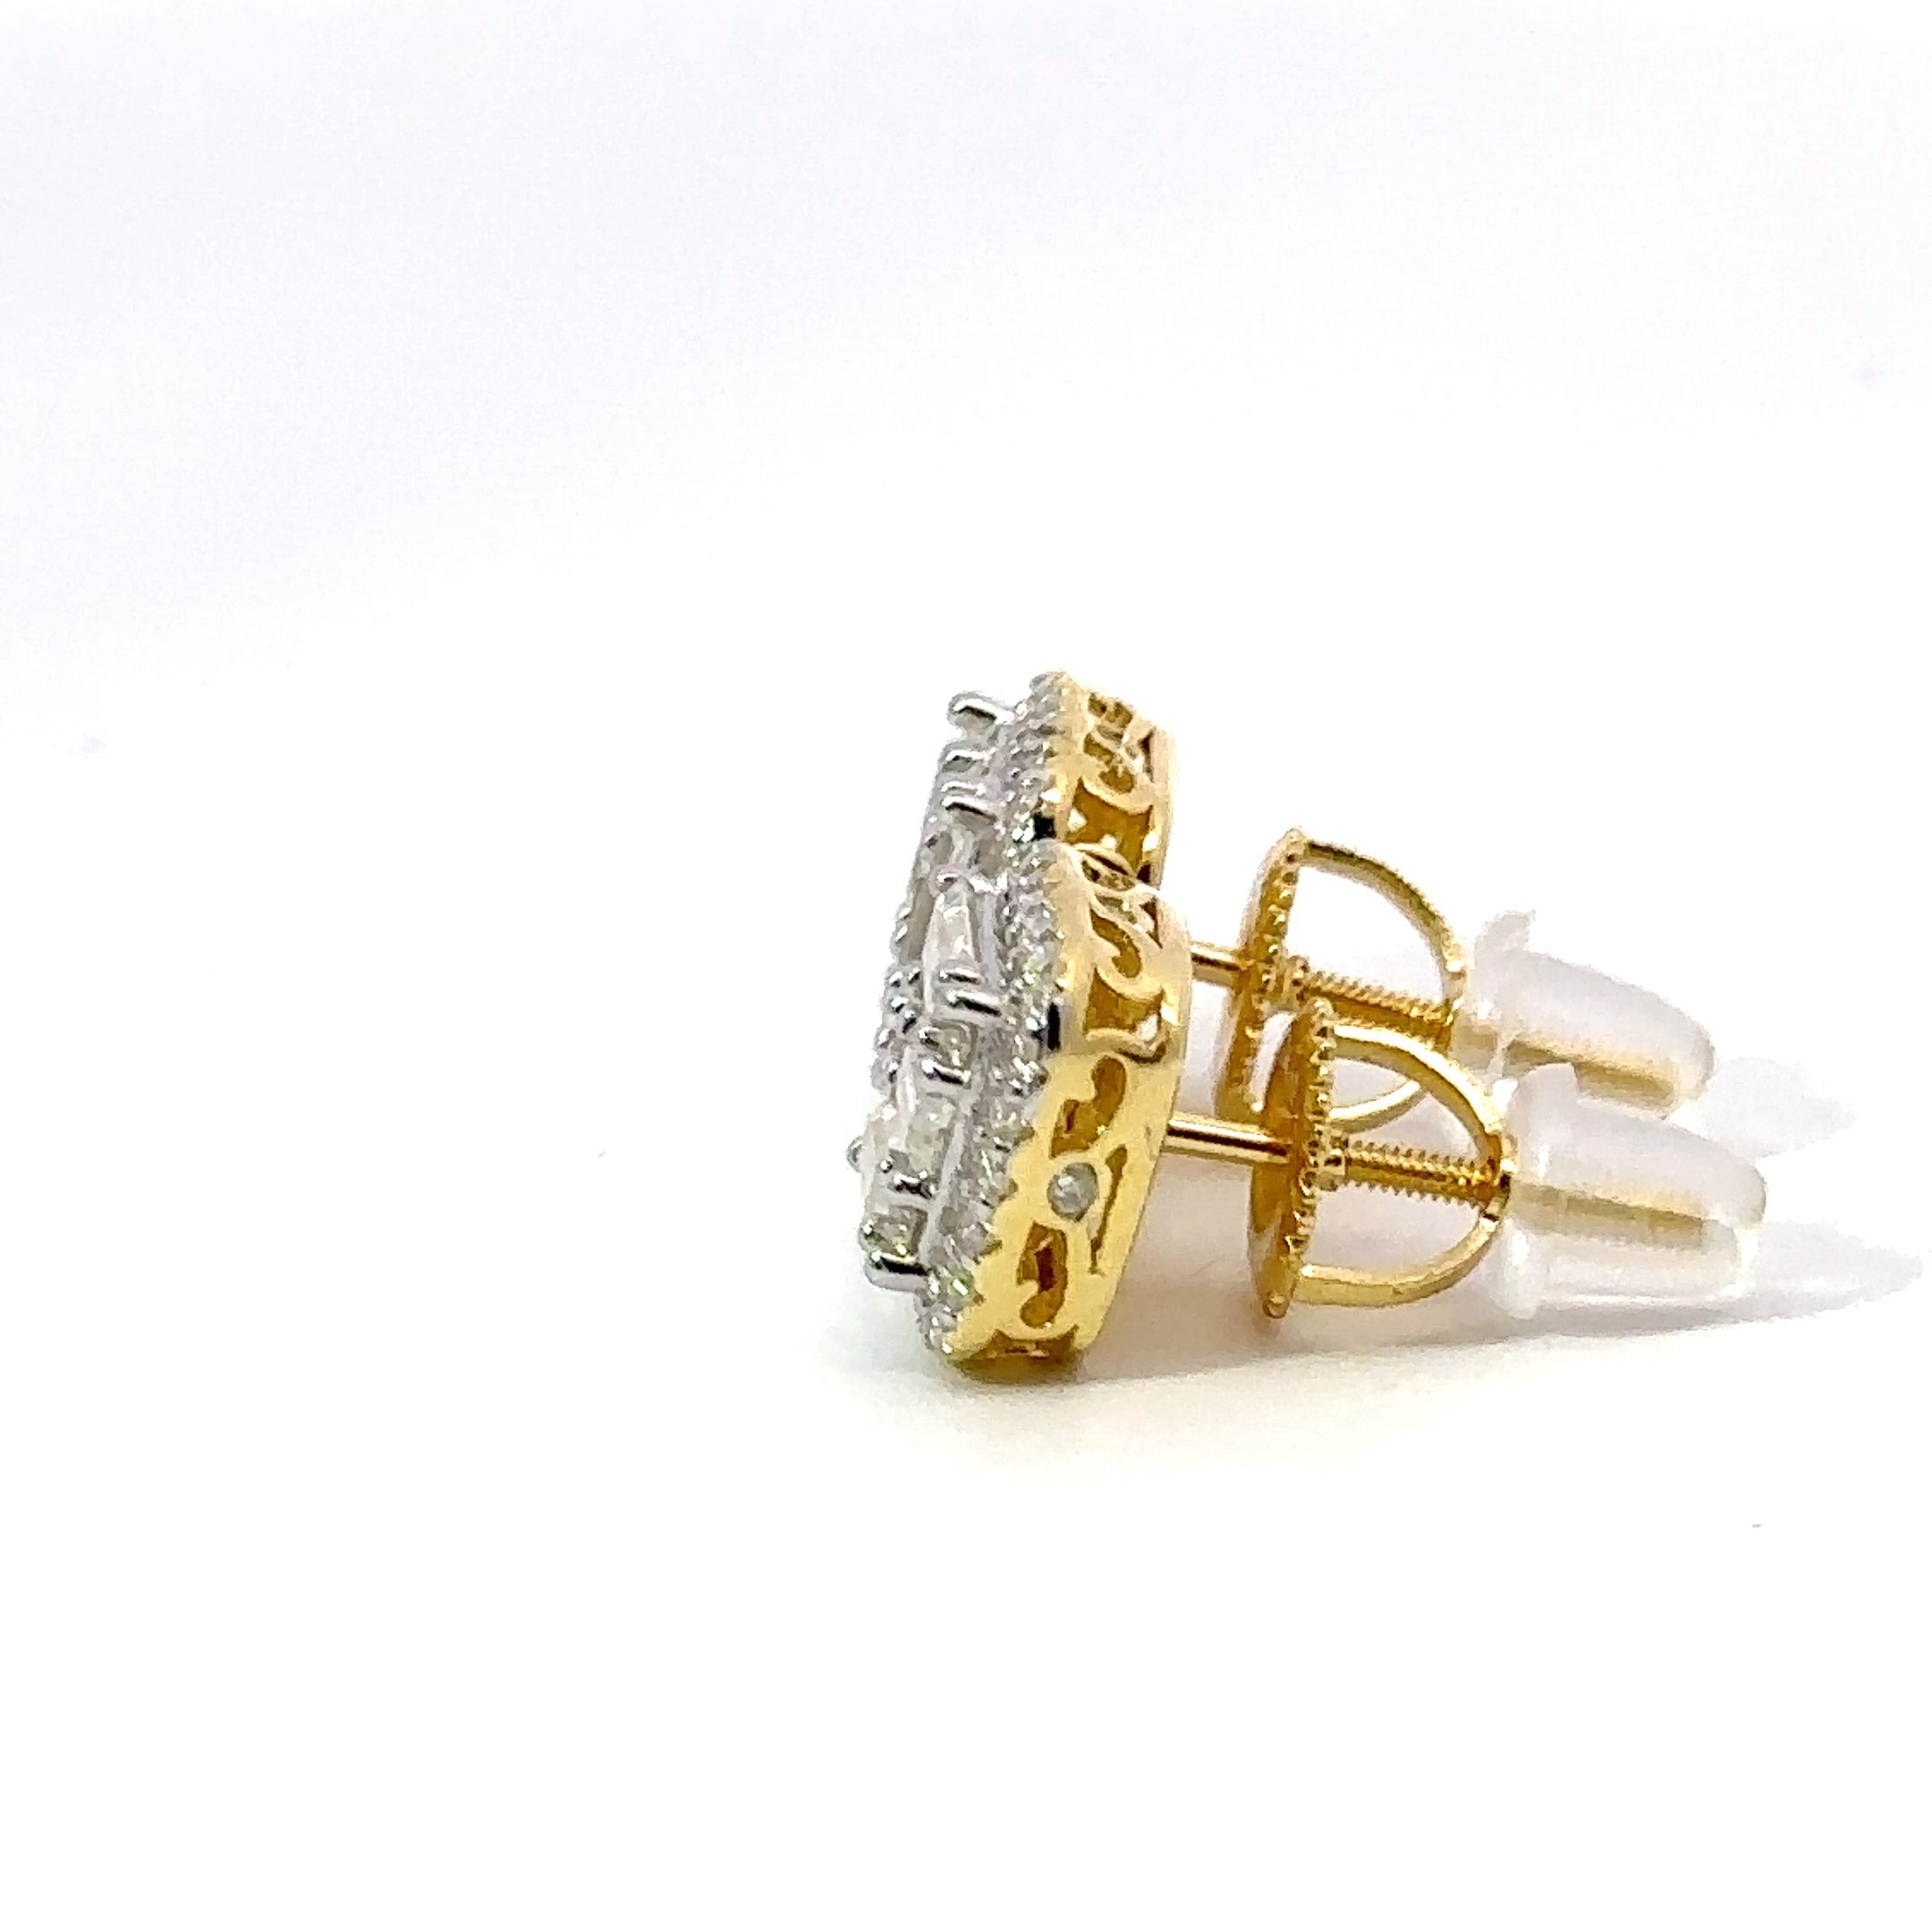 NOCTURNE 1.03 CTW 925 GOLD MOISSANITE ICED OUT EARRING | 994842